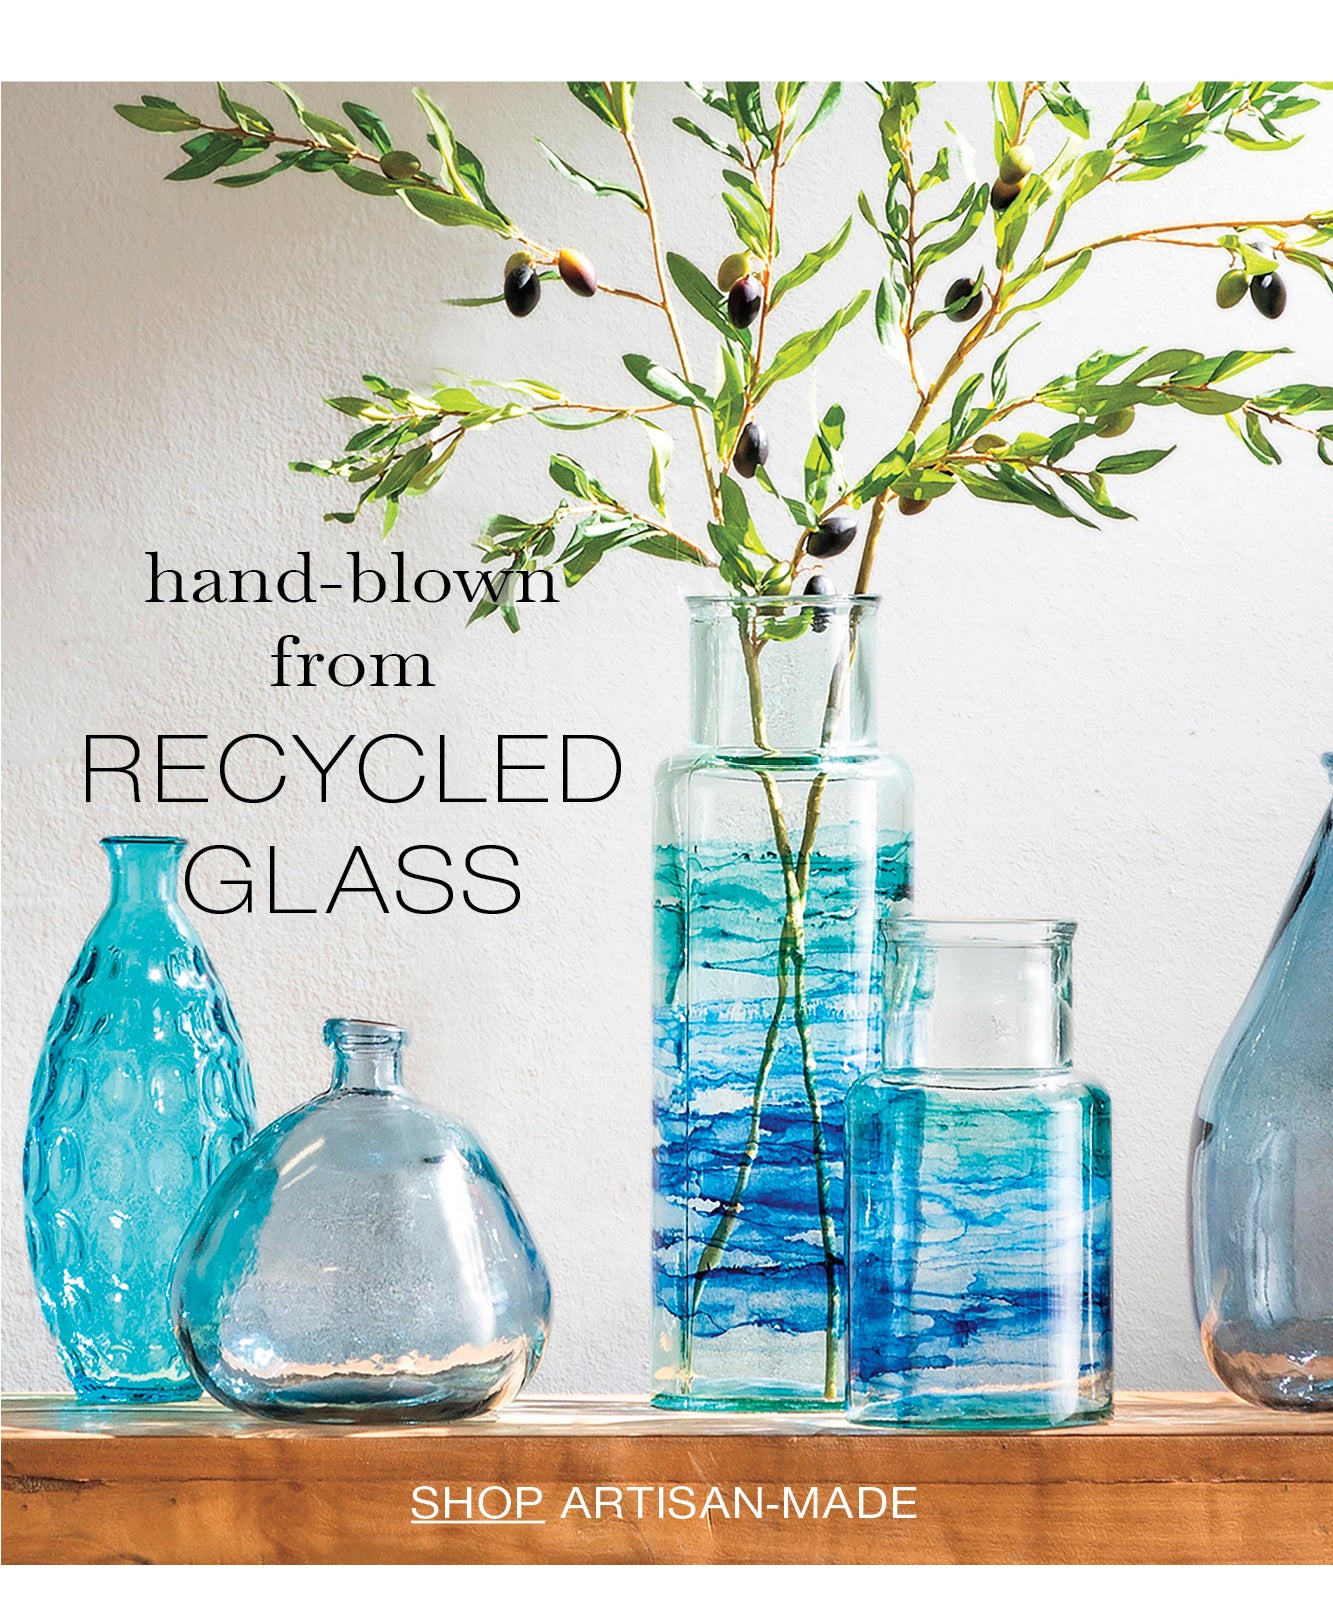 hand-blown from RECYCLED GLASS